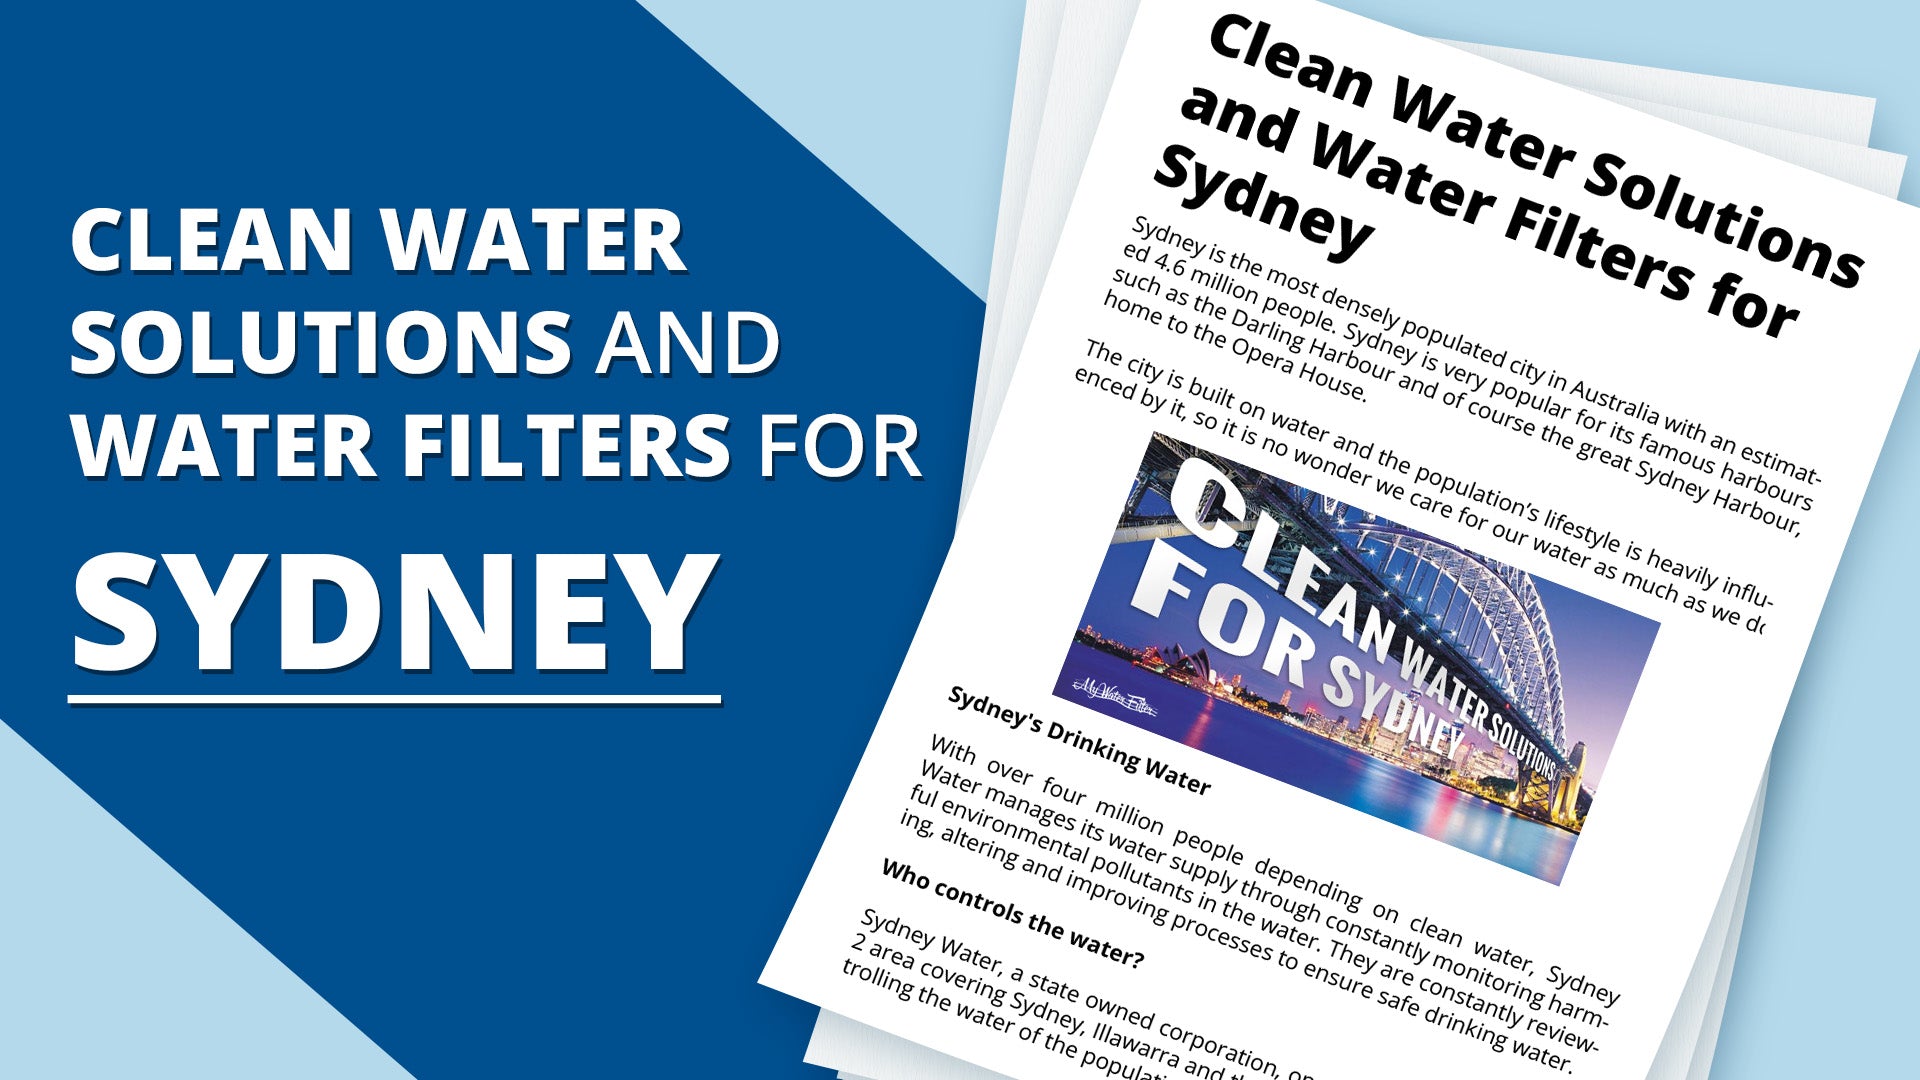 Clean Water Solutions and Water Filters for Sydney